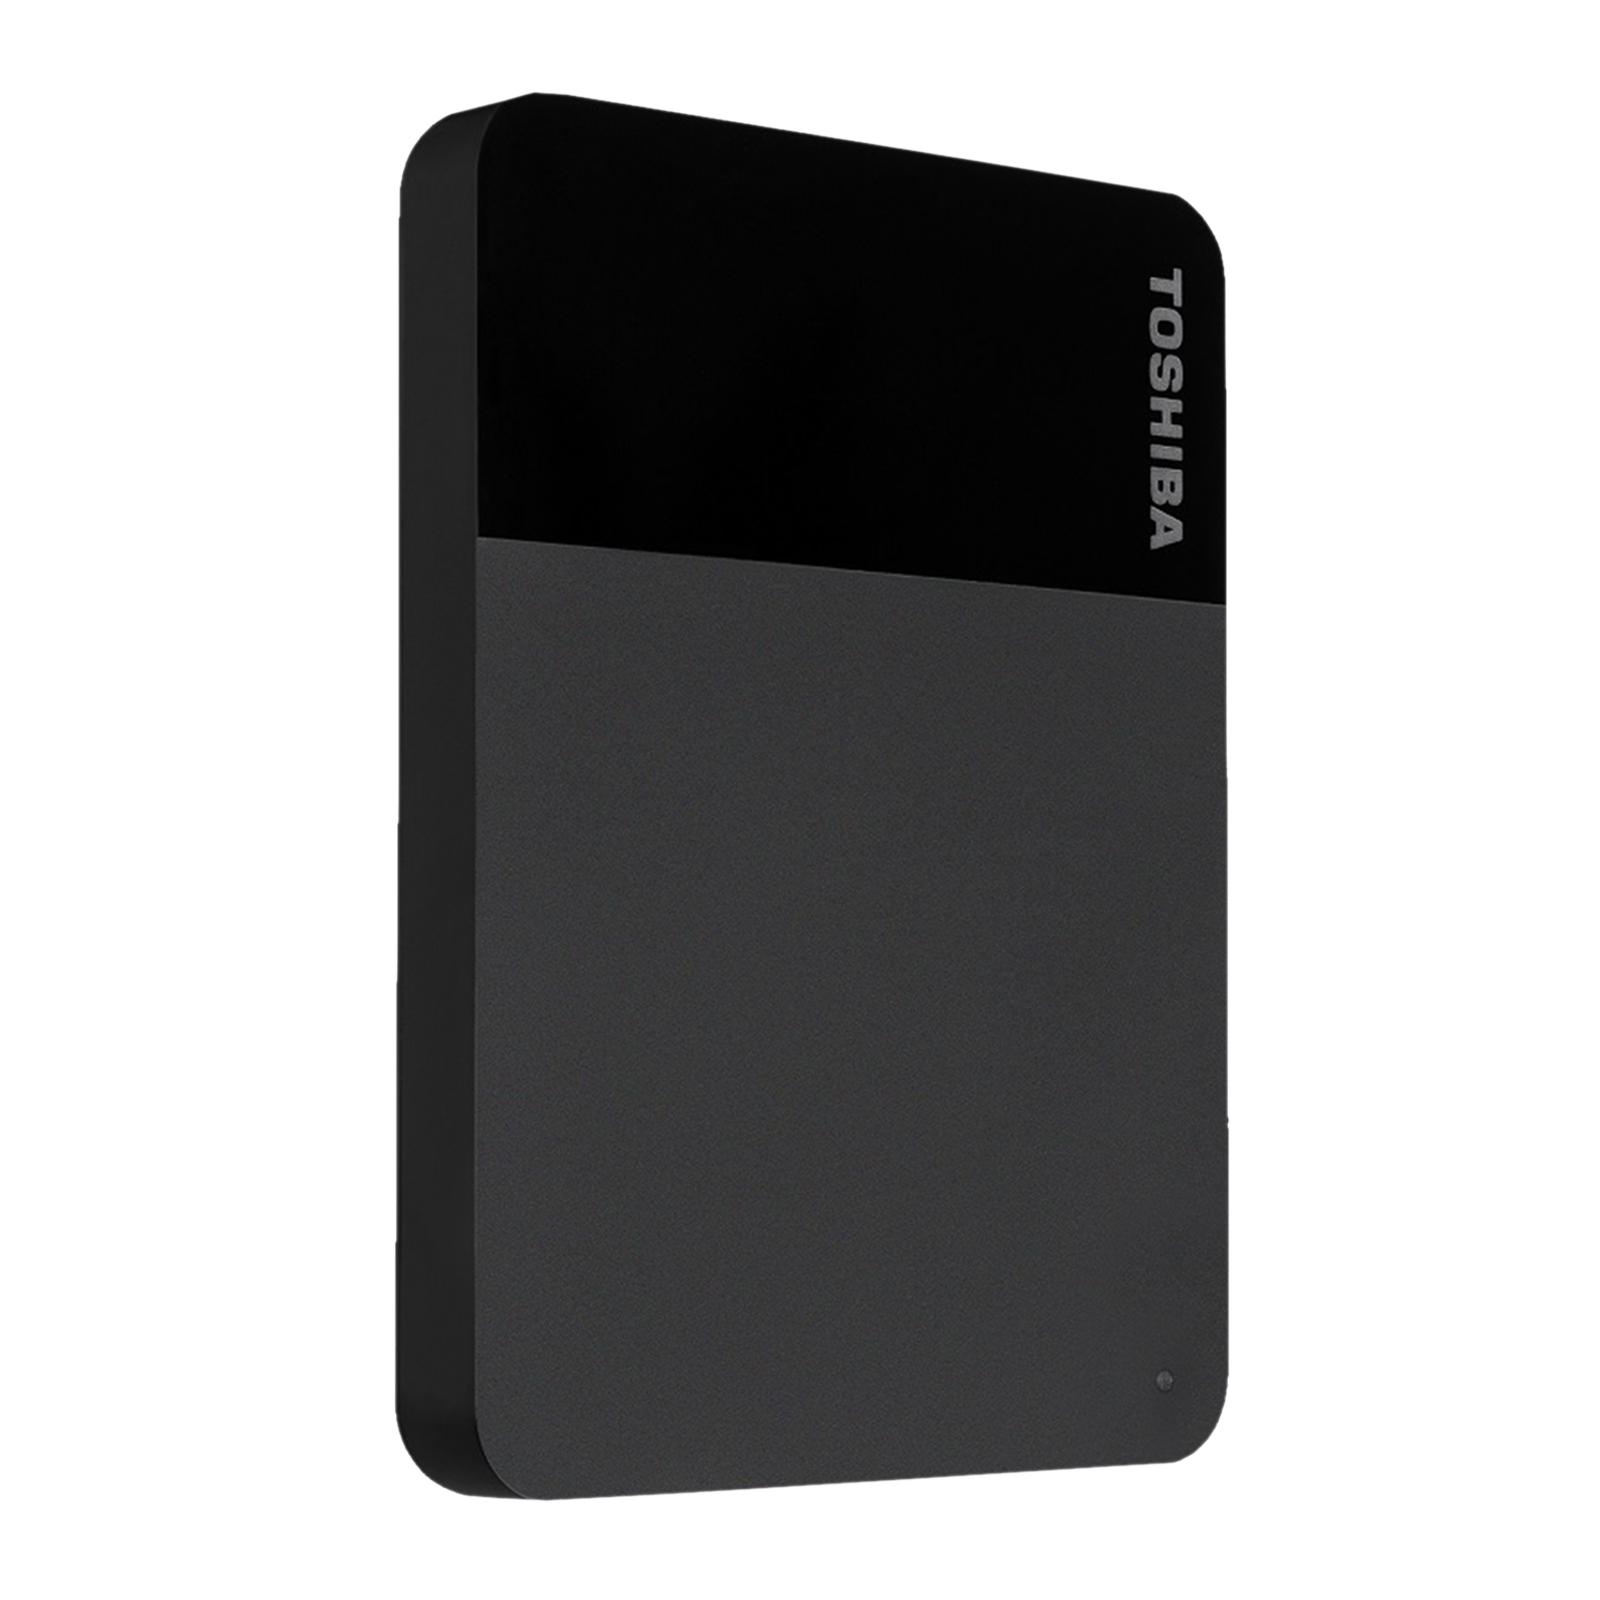 Toshiba Canvio Advance 4TB Review: Simple, Portable, And Practical